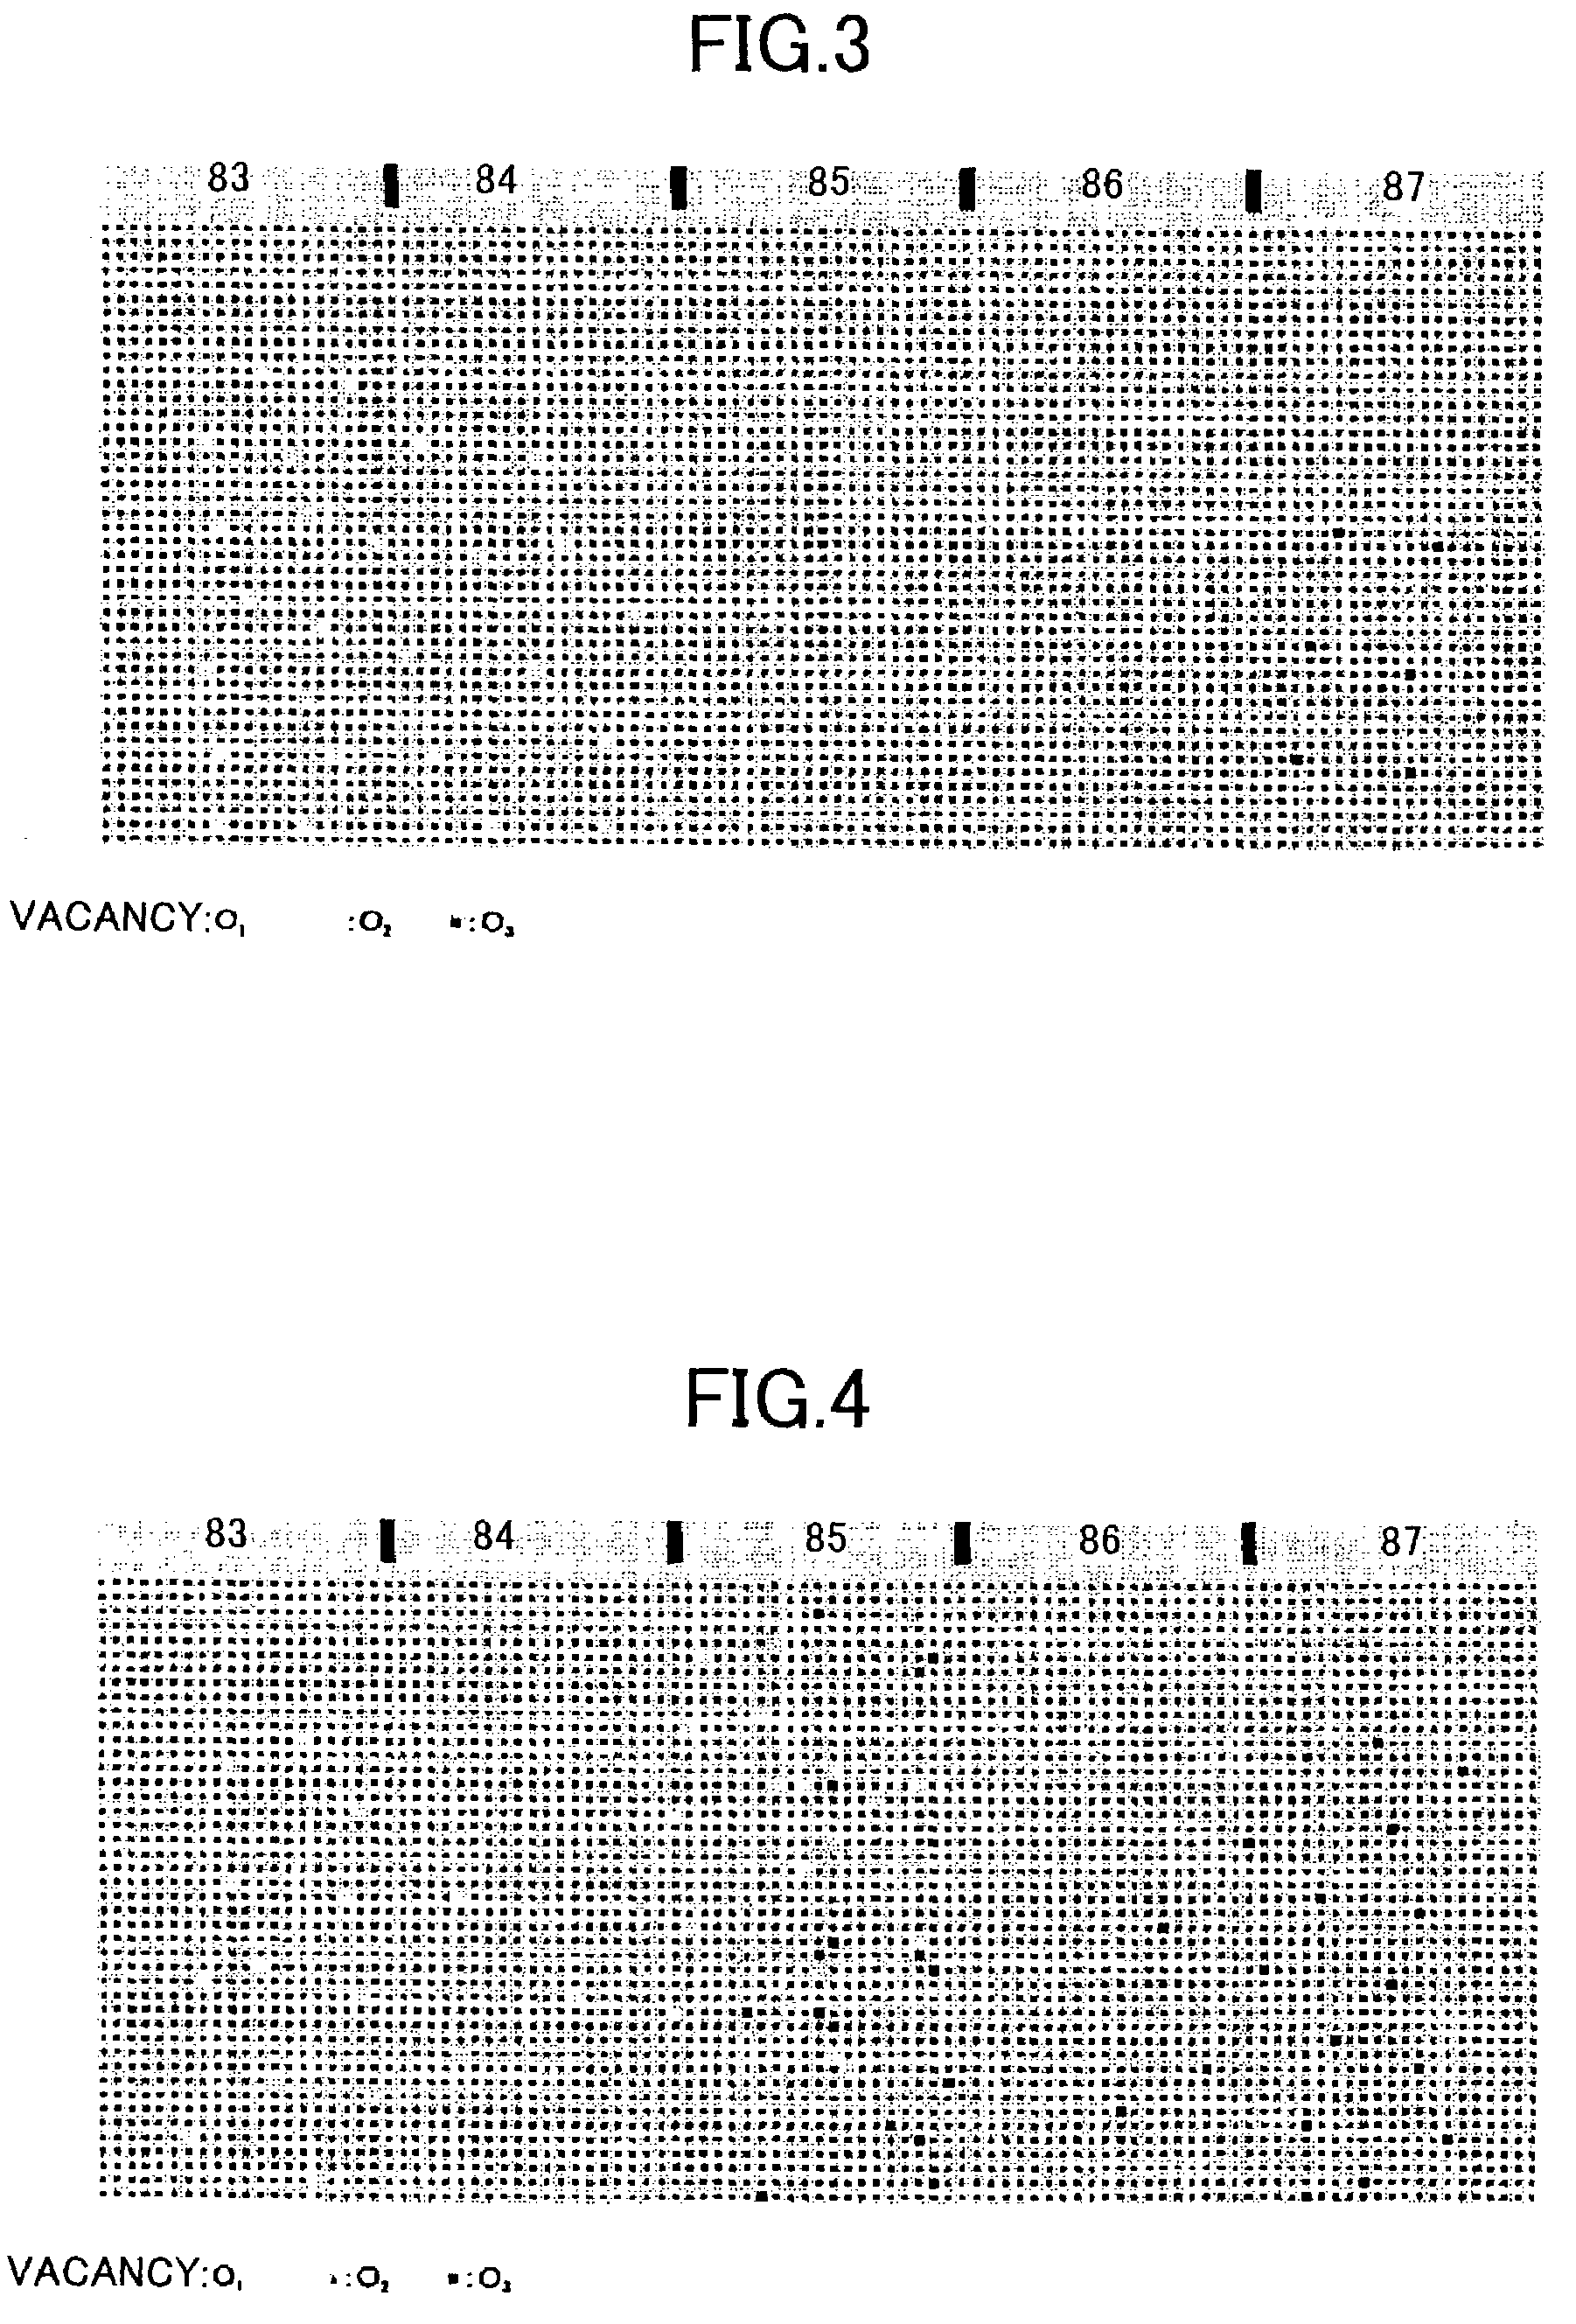 Image forming device, image forming method, and recording medium that provide multi-level error diffusion